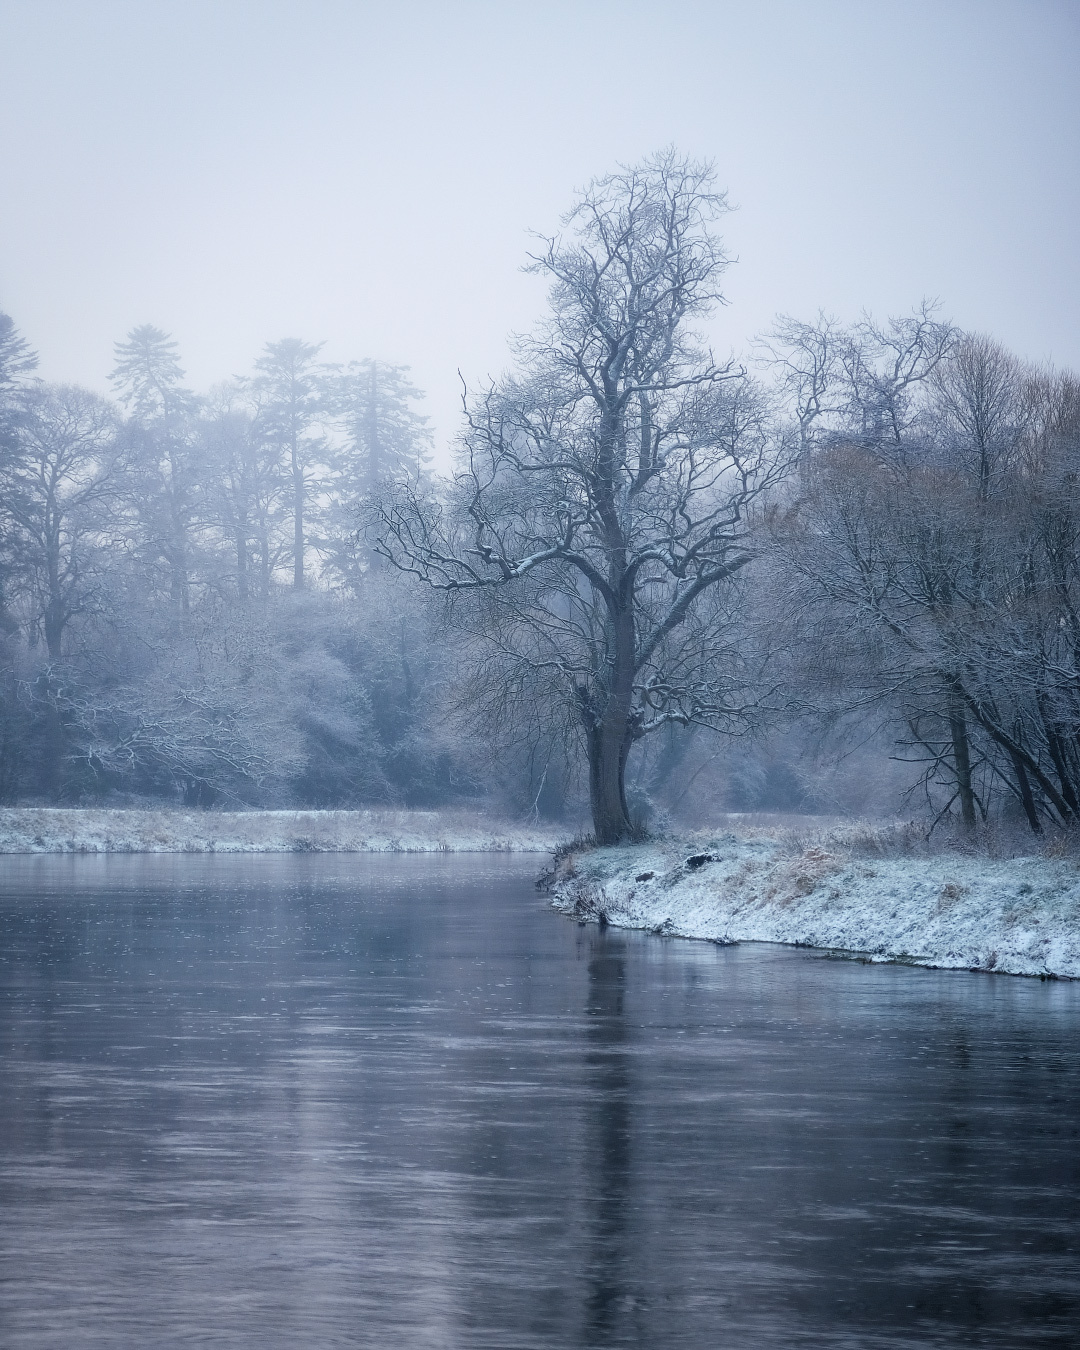 ...white serenity... ireland winter landscape nature outdoors countryside boyne meath river valley serenity calm haze mist misty mood moody tree lonely bend scenic picturesque awe europe cold snow freeze frost season